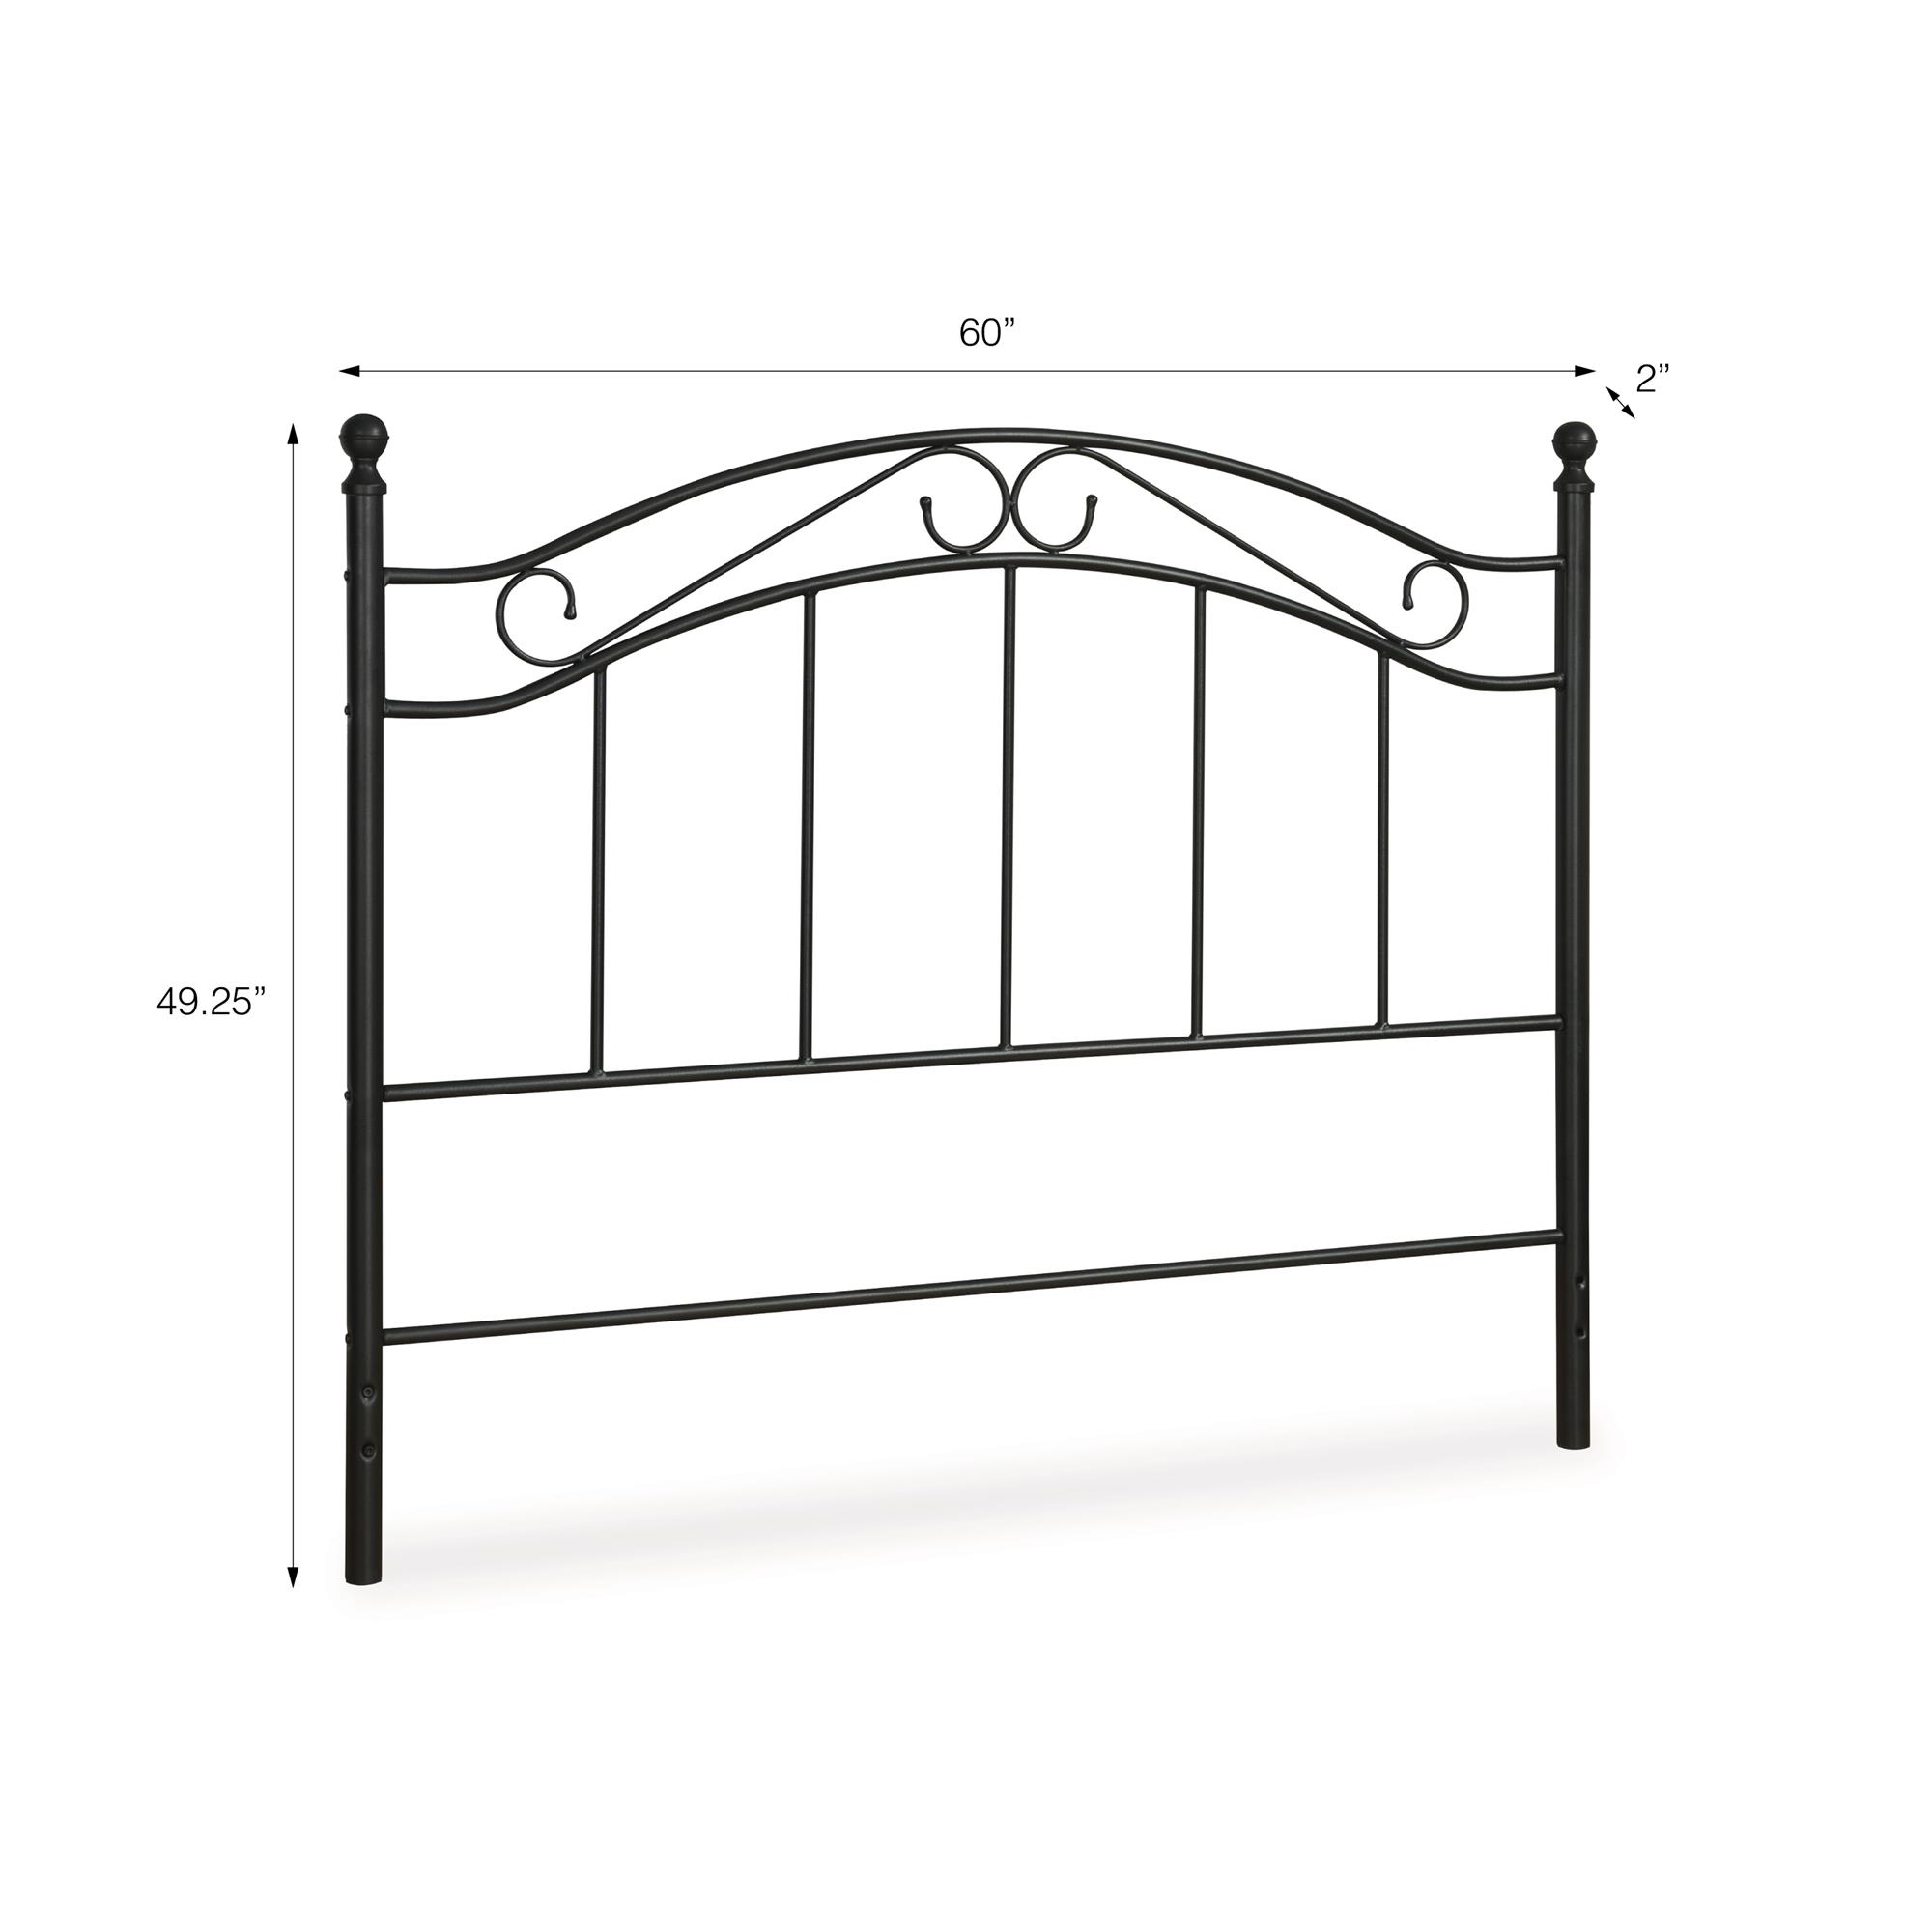 Mainstays Full/Queen Metal Headboard with Delicate Detailing, Black - image 5 of 8